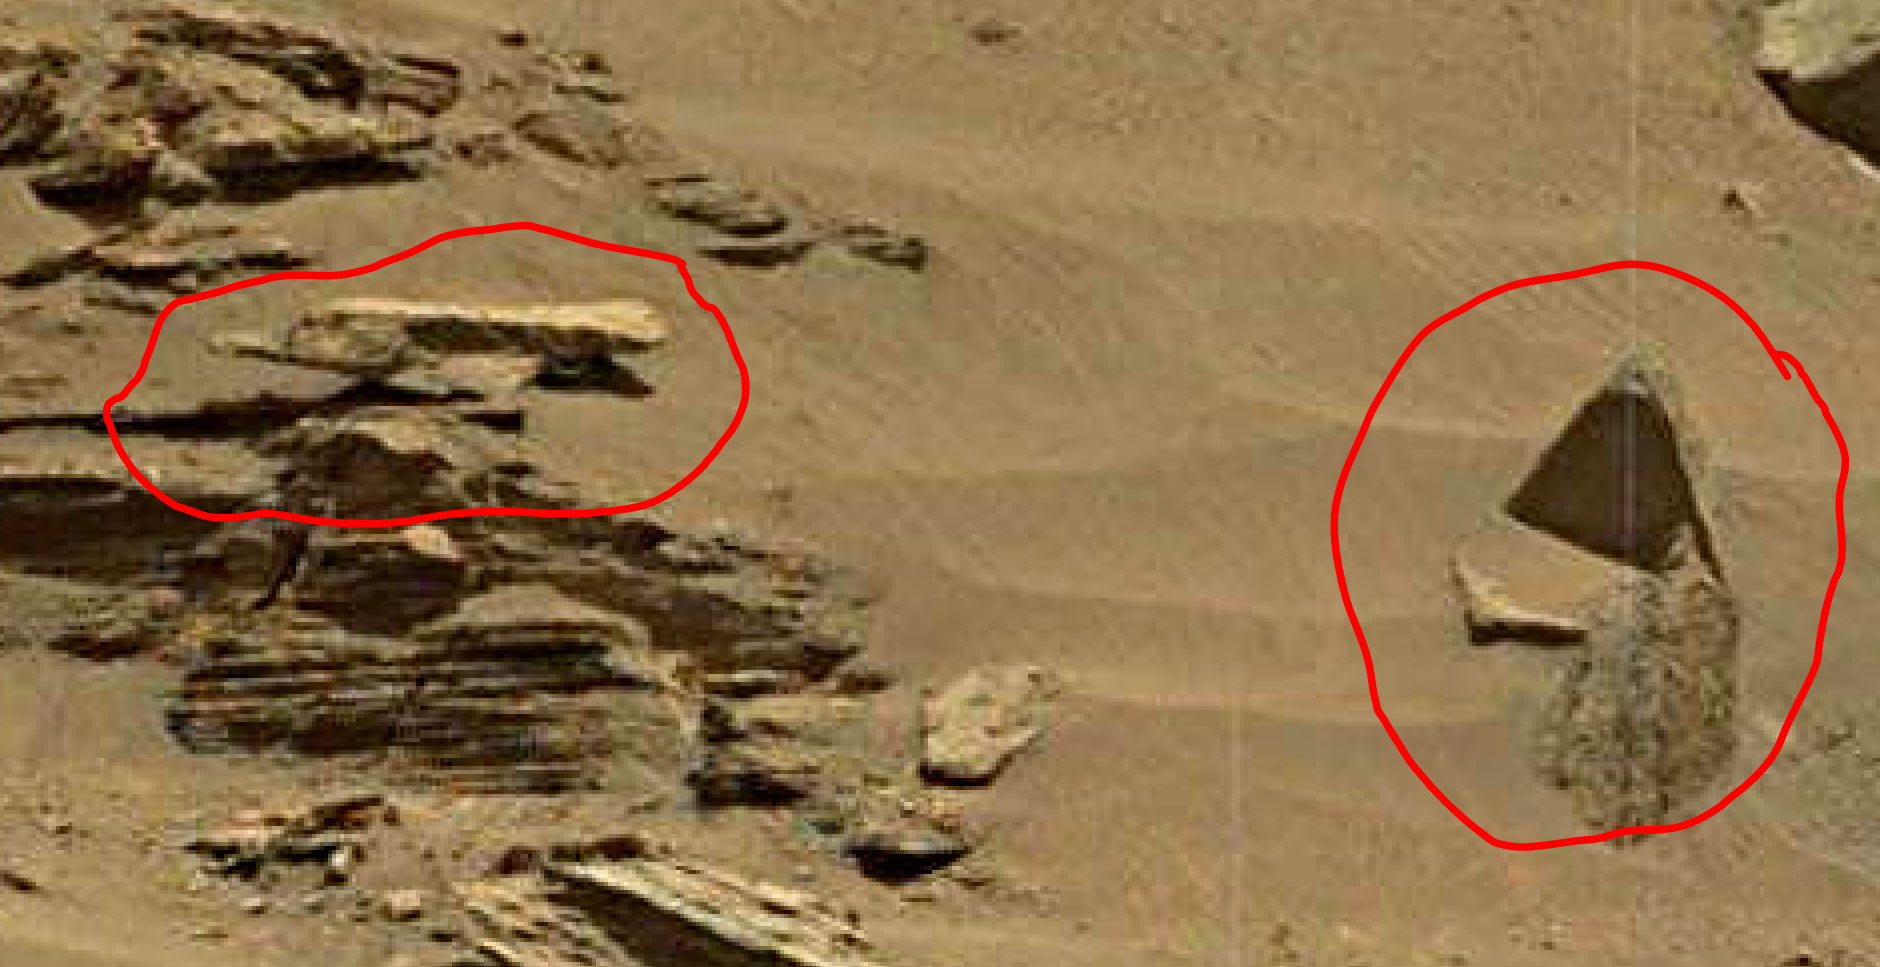 mars sol 1432 b&w anomaly artifacts 15 was life on mars